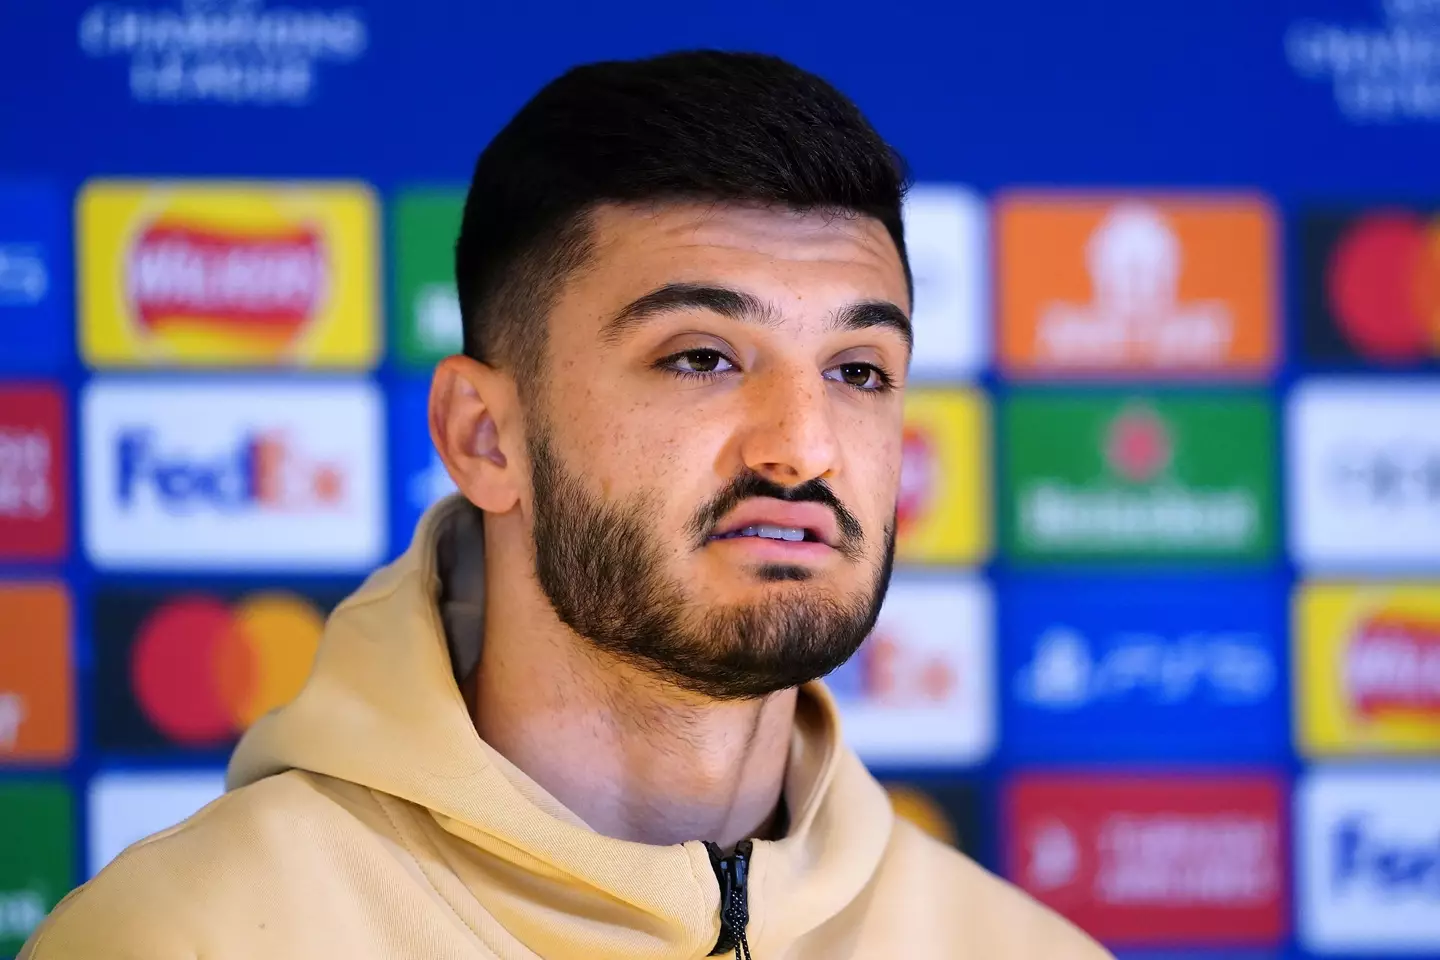 Broja during a press conference. (Image